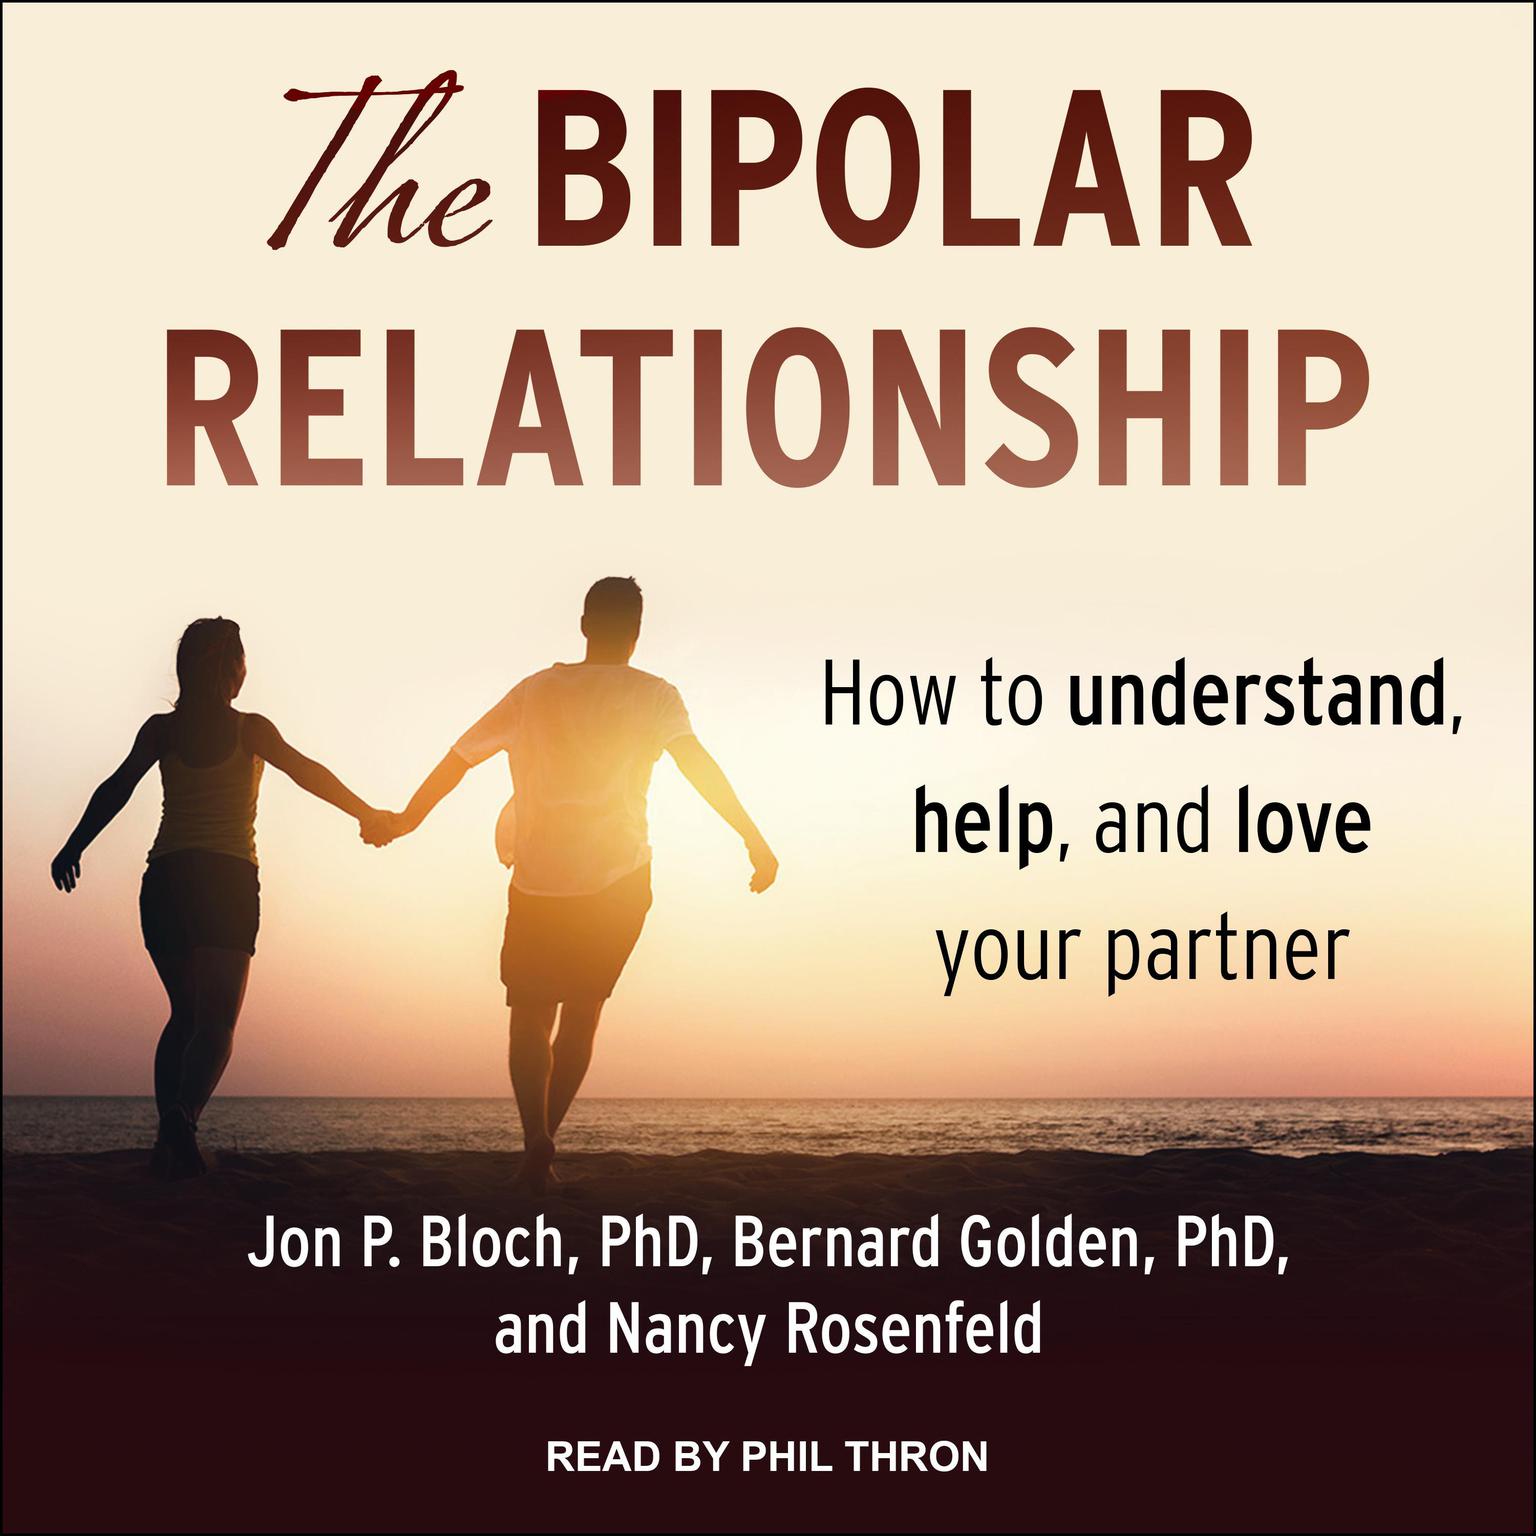 The Bipolar Relationship: How to understand, help, and love your partner Audiobook, by Bernard Golden